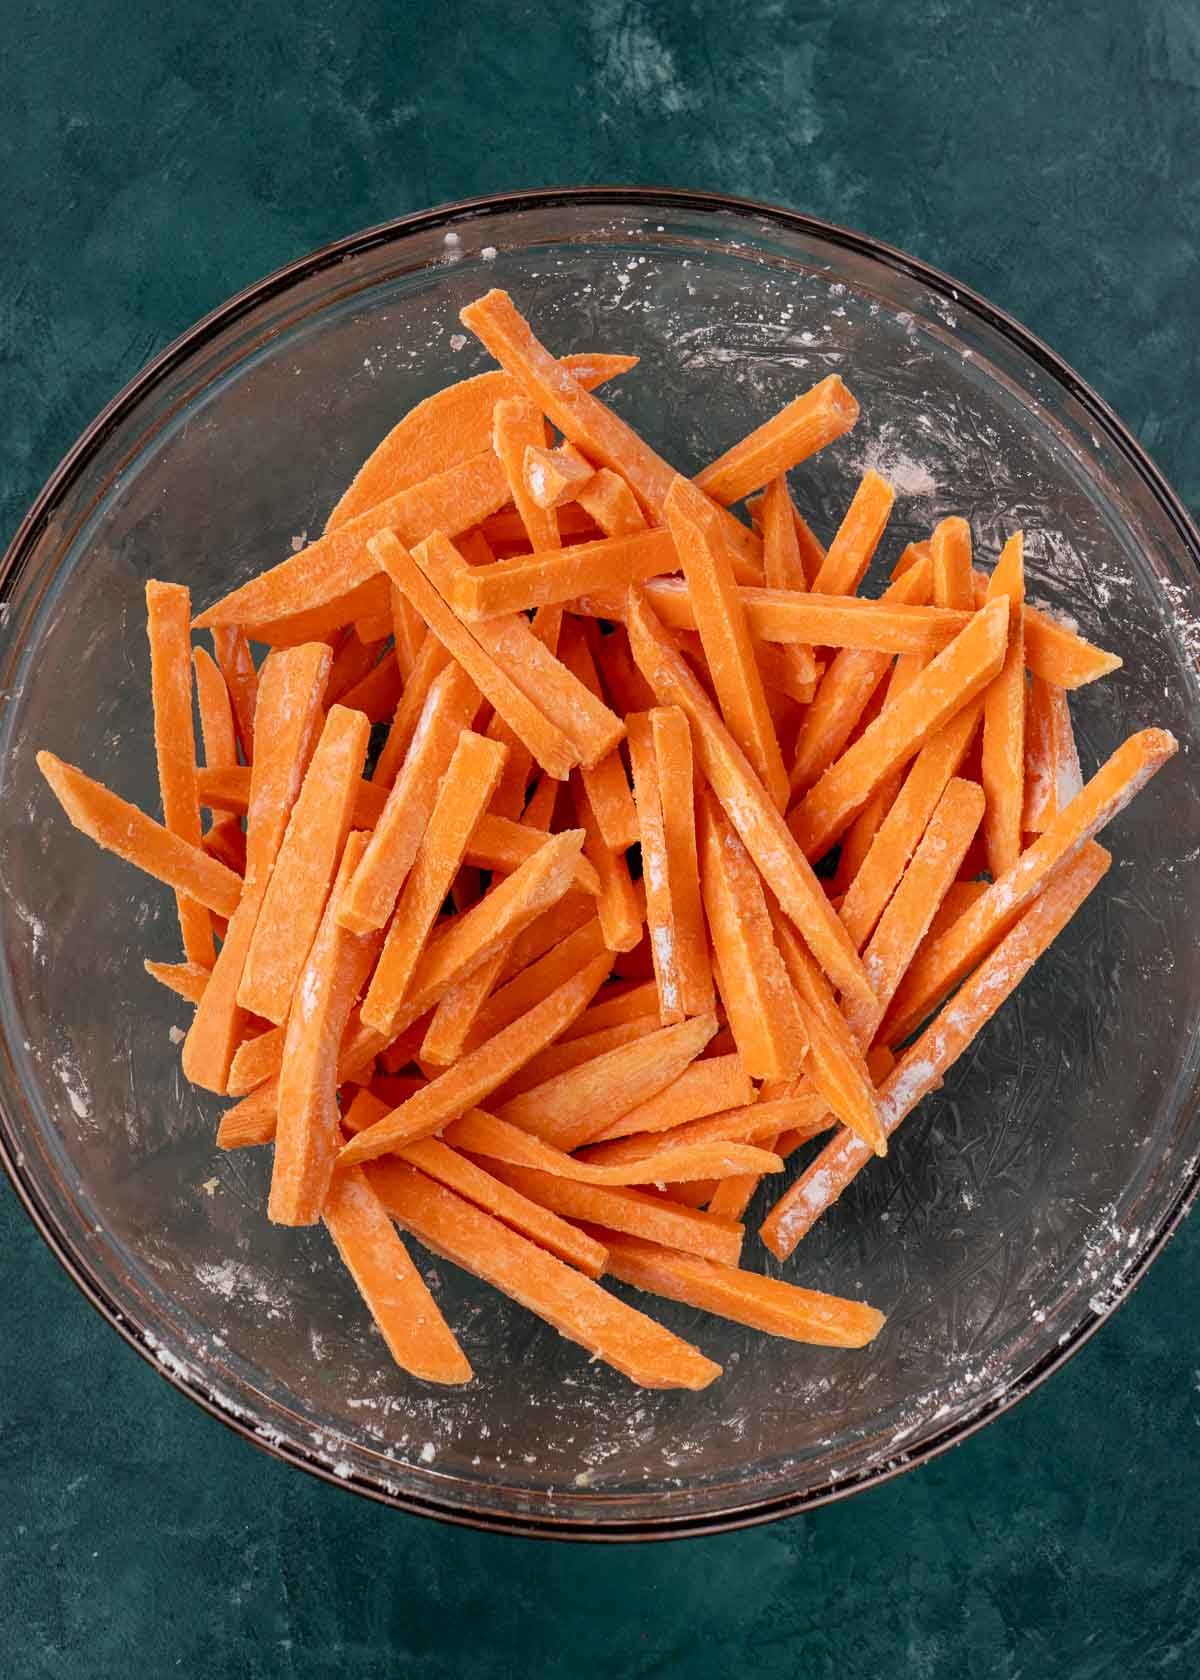 Corn starch on sweet potato fries in mixing bowl